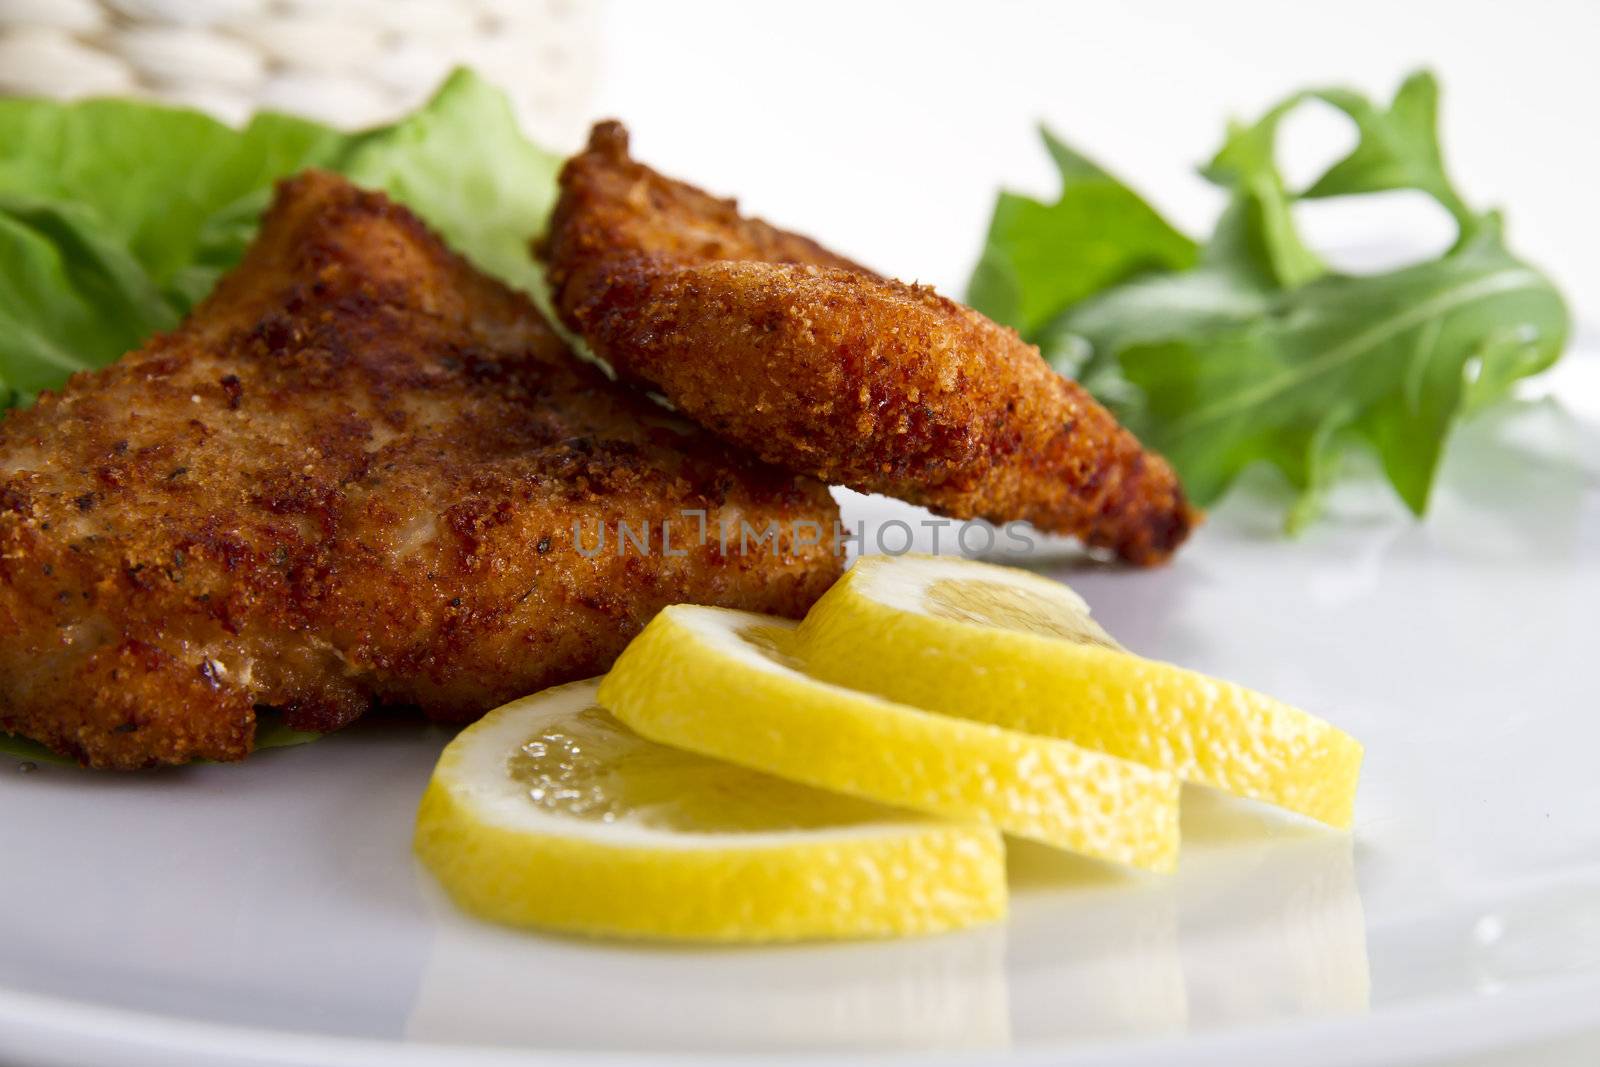 Breaded meat with lemon and salad